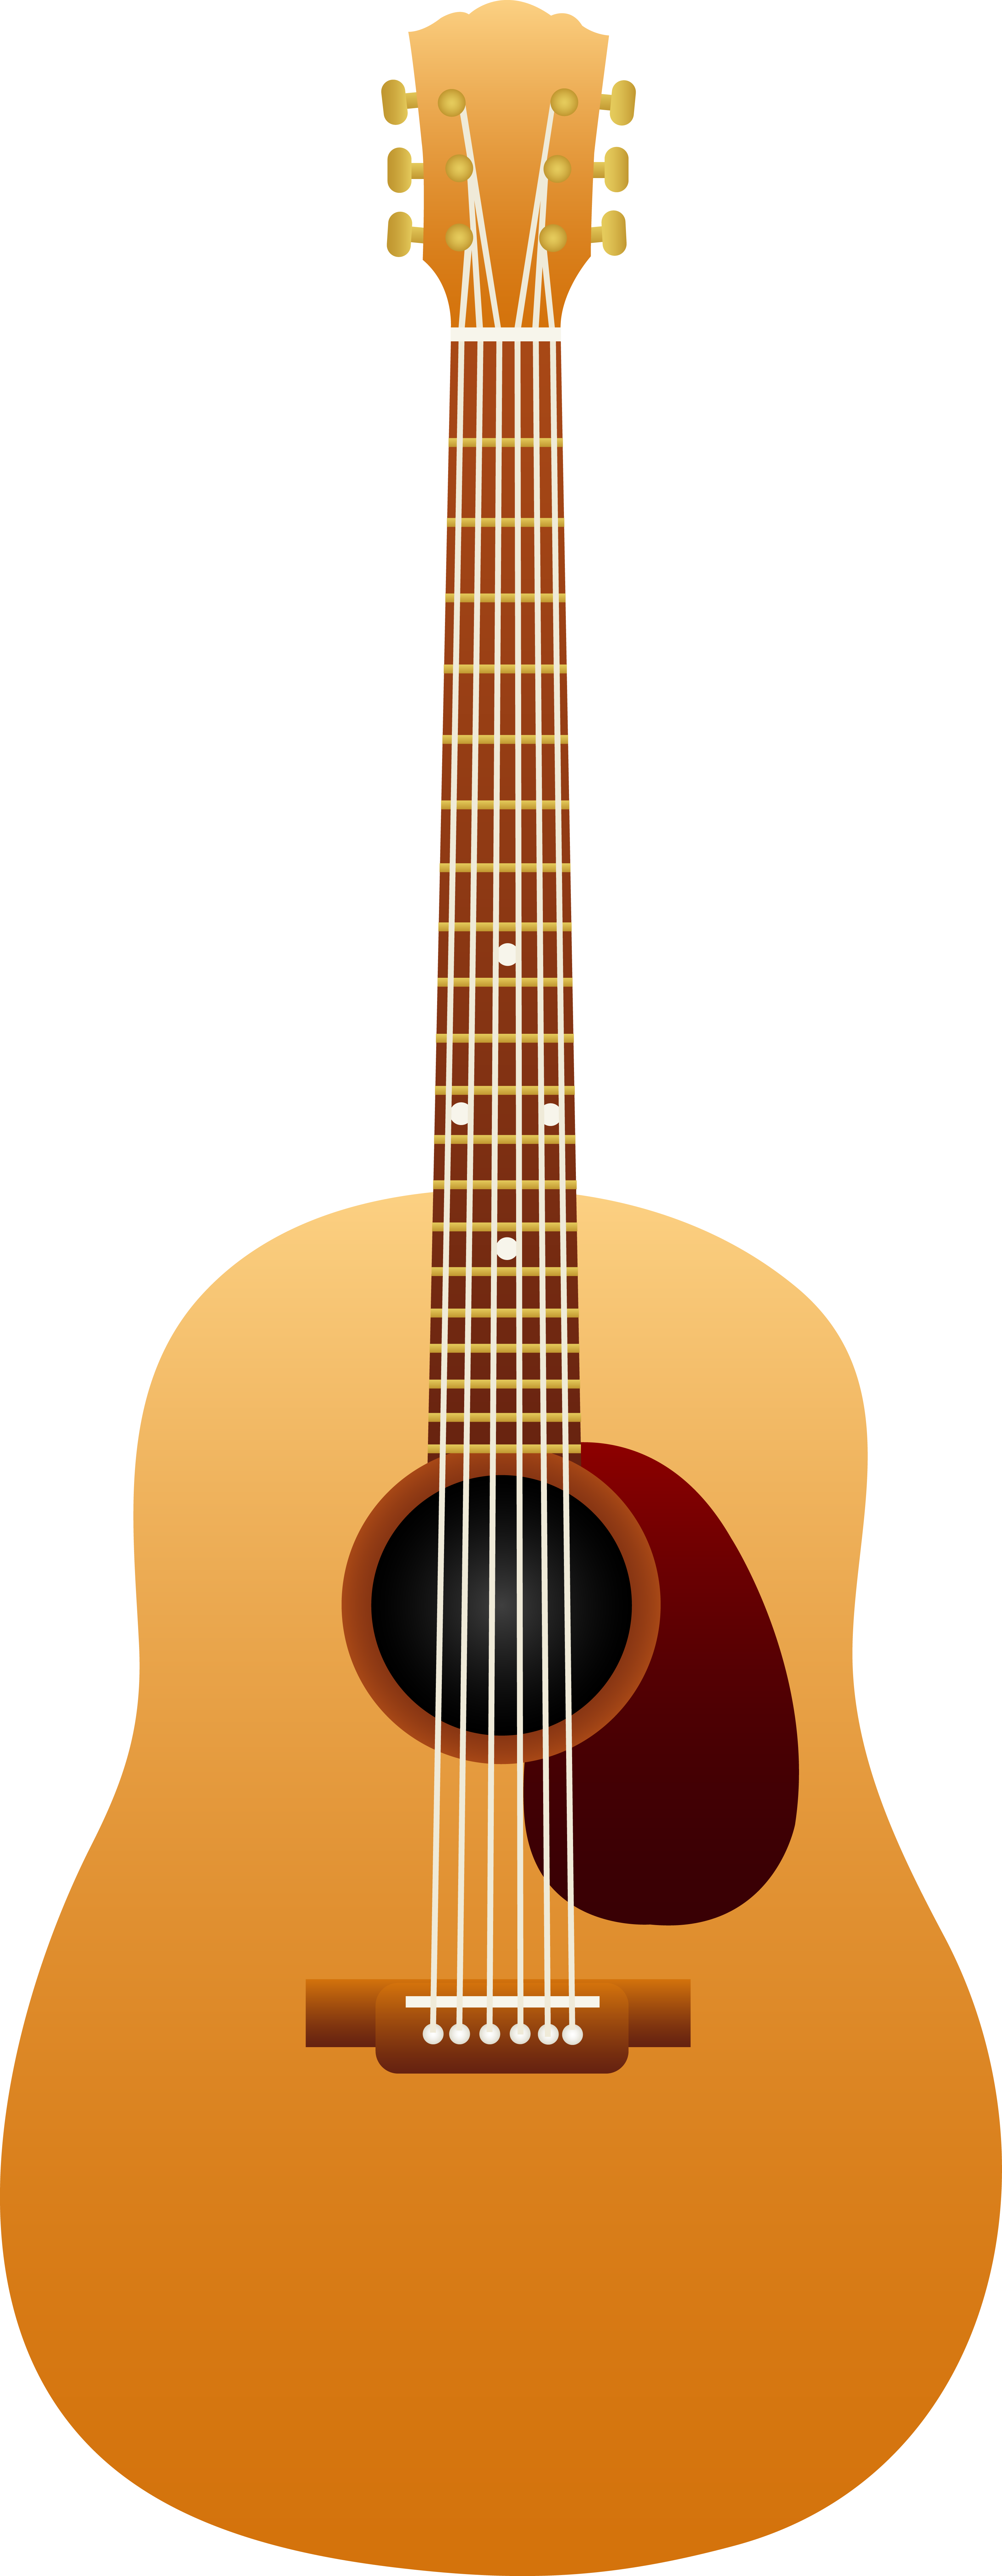 Free Free Guitar Image, Download Free Clip Art, Free Clip Art on Clipart Library